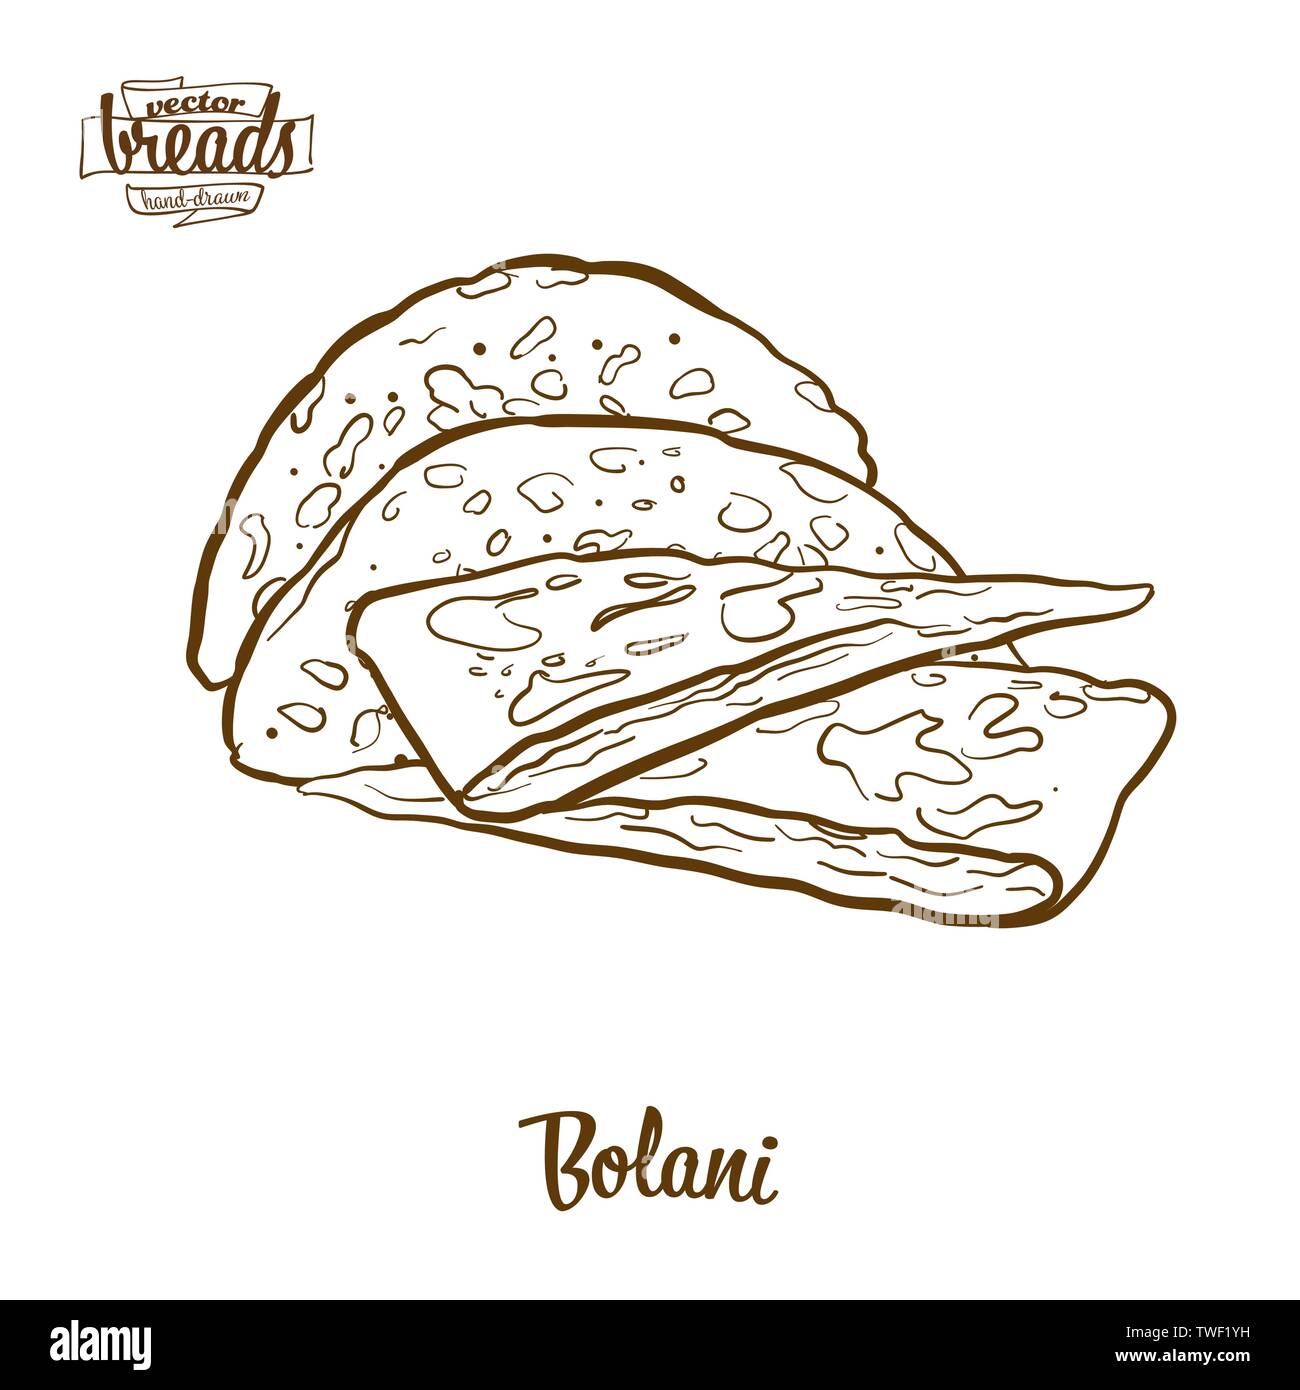 Bolani bread vector drawing. Food sketch of Flatbread, usually known in Afghanistan. Bakery illustration series. Stock Vector